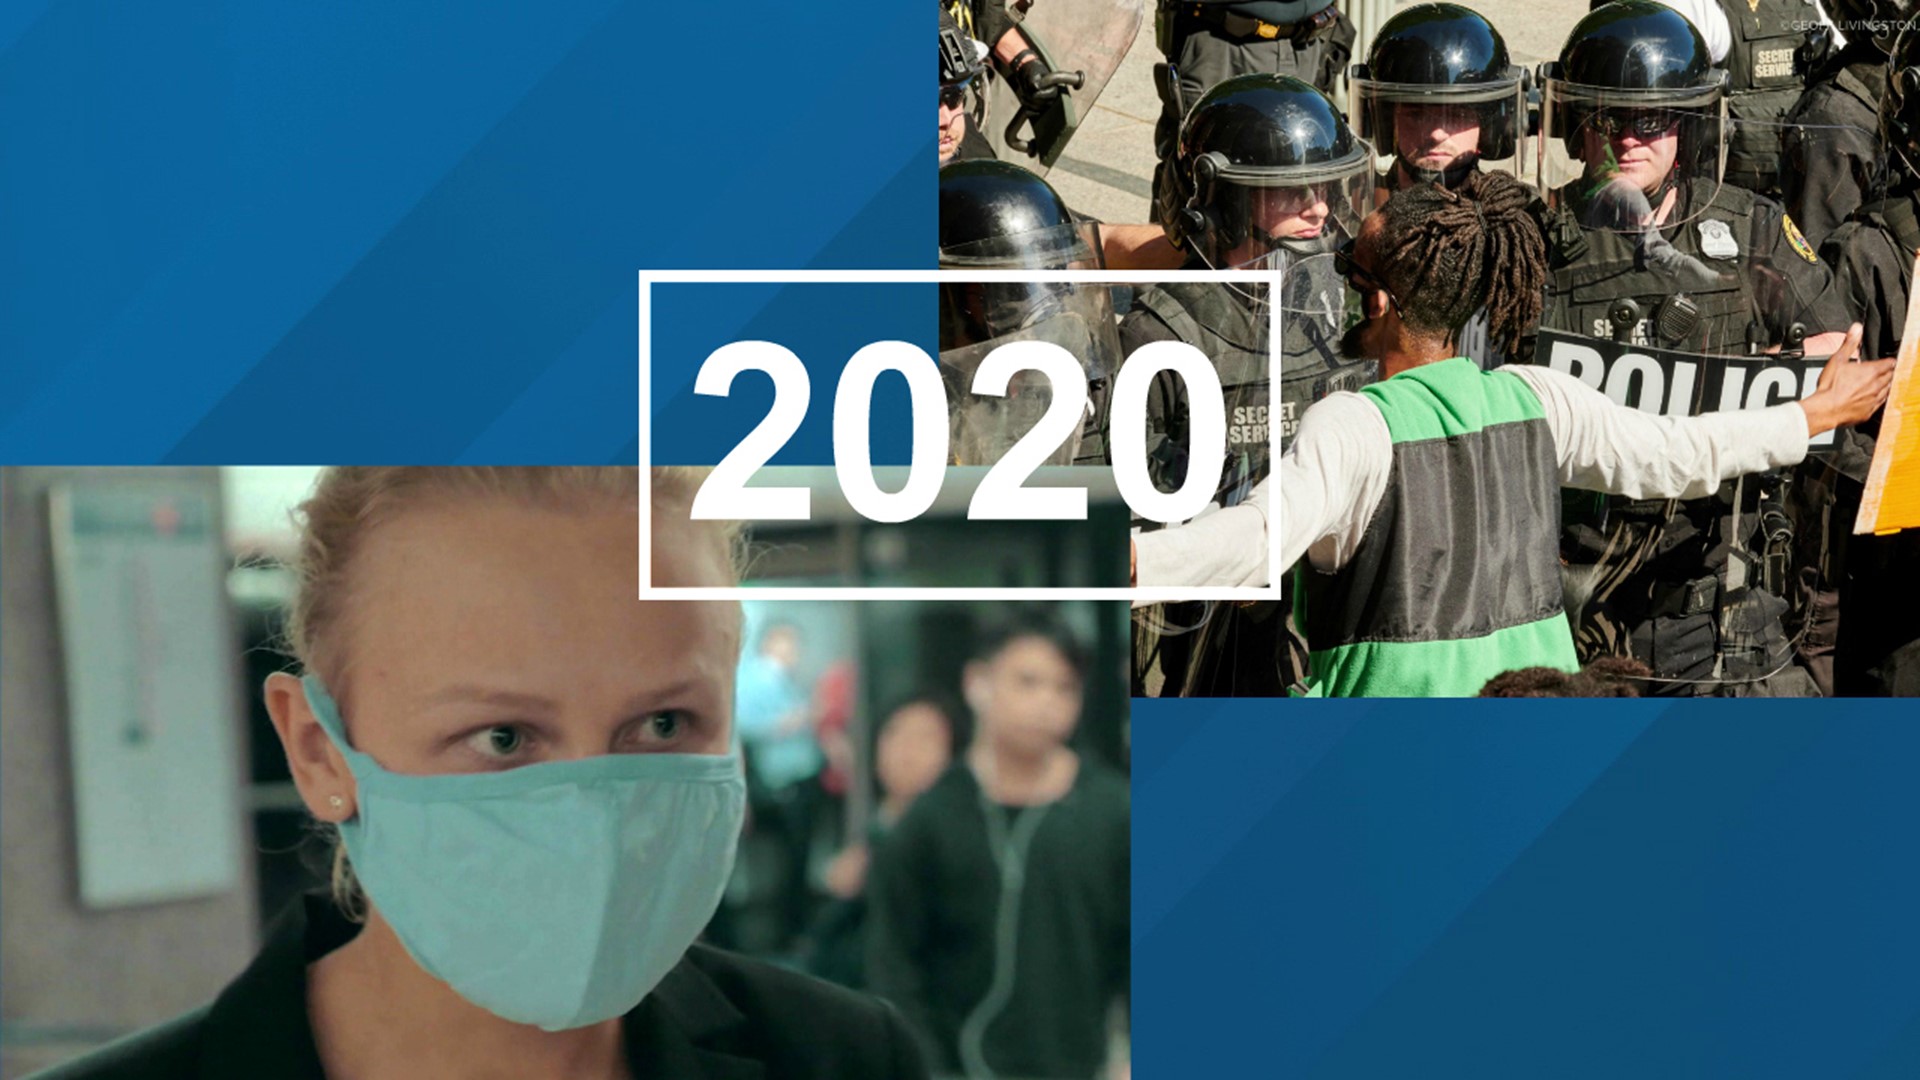 Professors are looking at the first half of 2020 and what it means for politics and history.